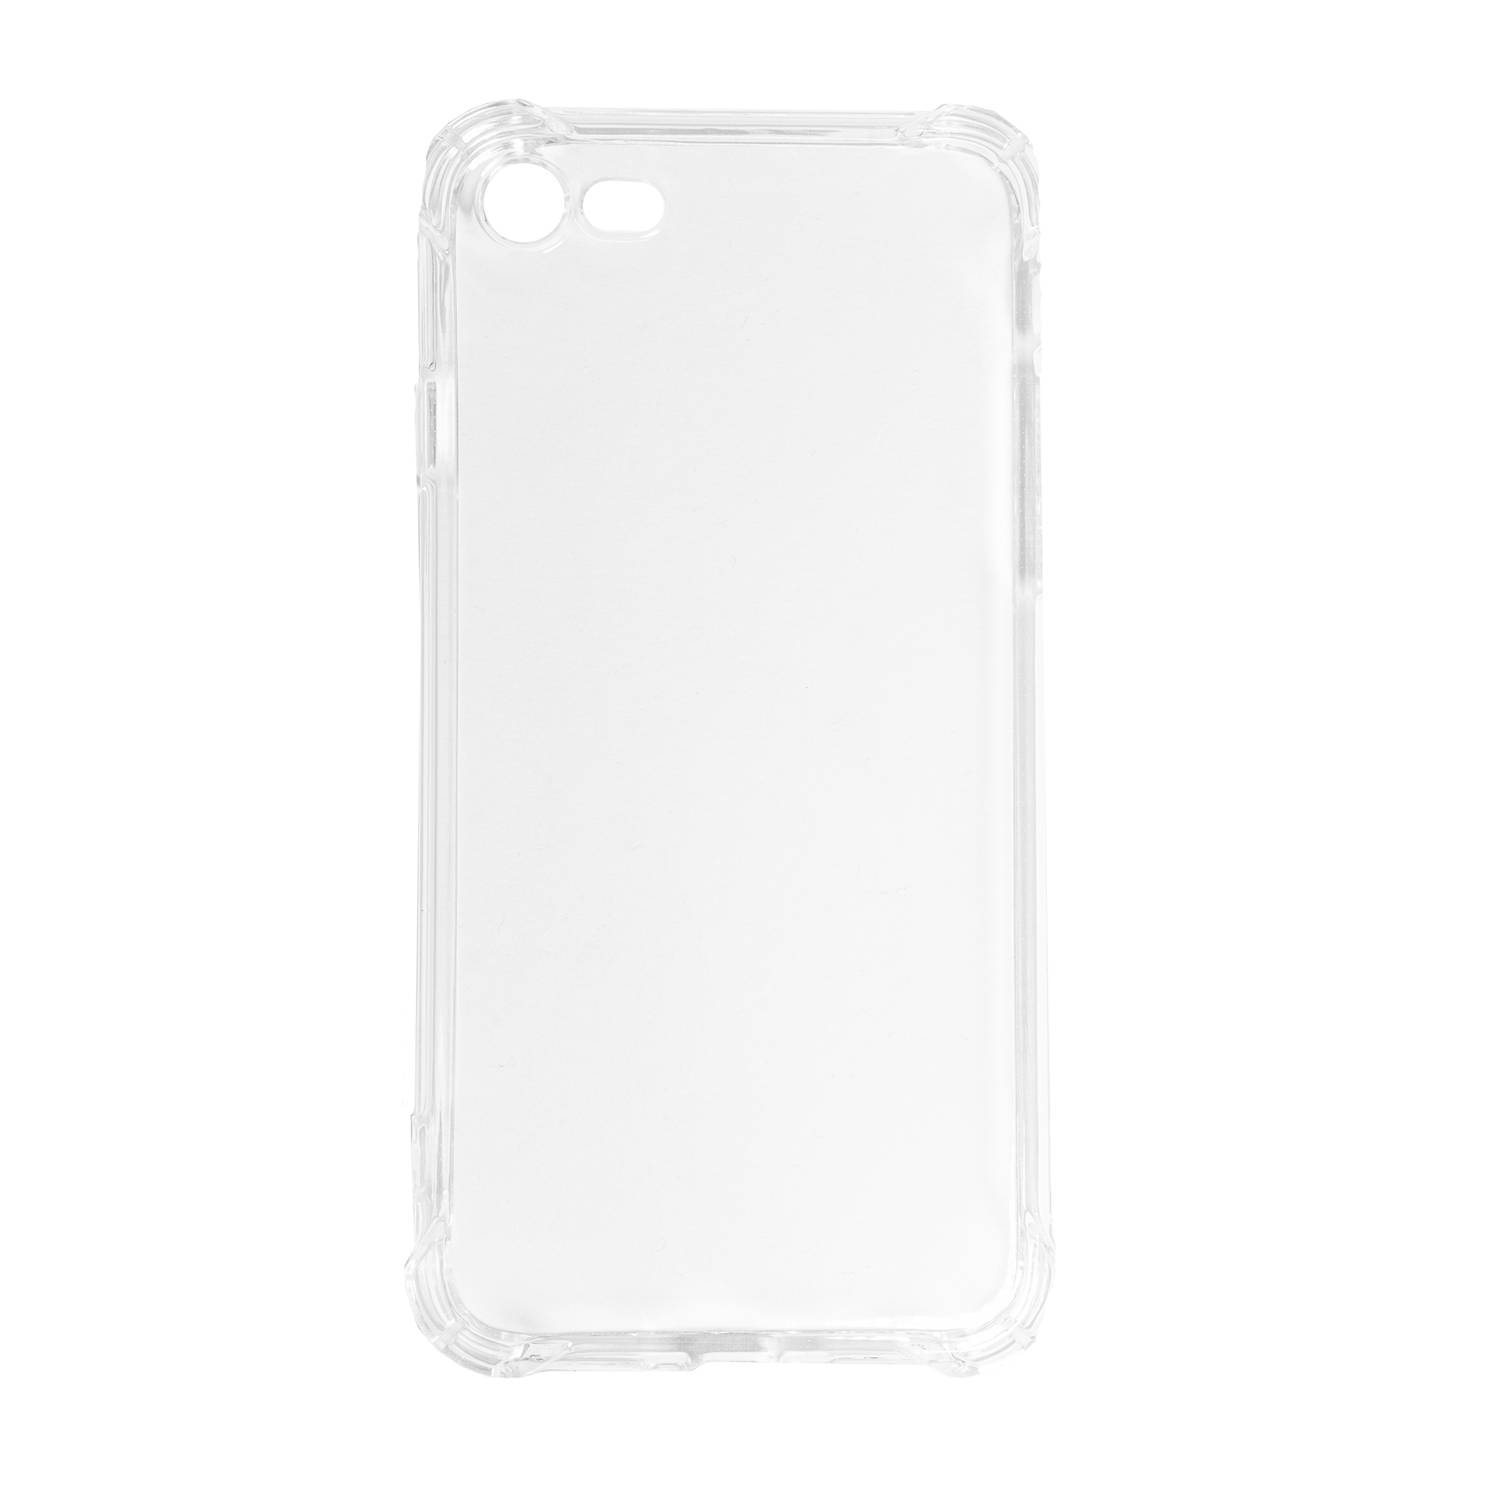 BMAX TPU soft case hoesje voor iPhone 7/8 - Clear/Transparant